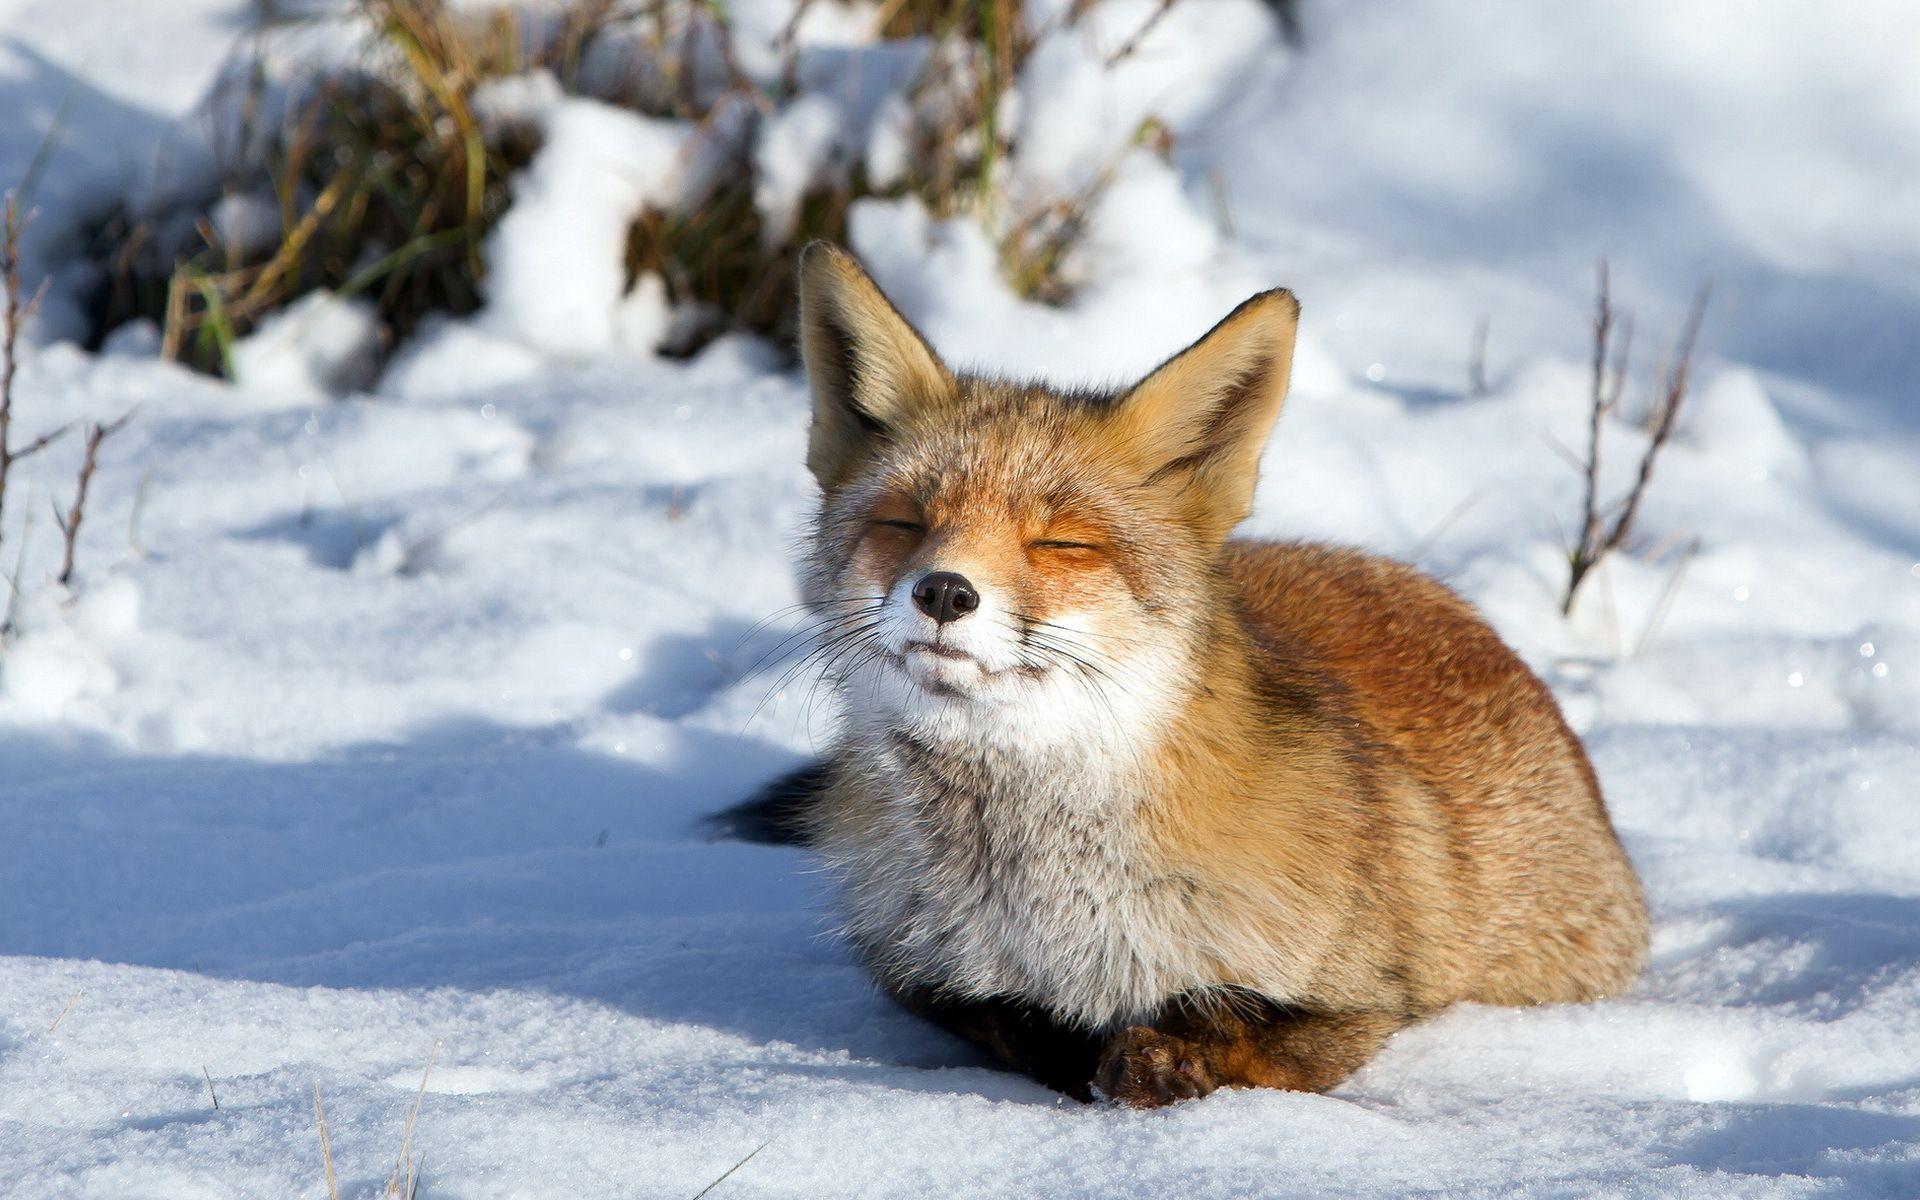 Snow, Muzzle, Fox wallpaper and image, picture